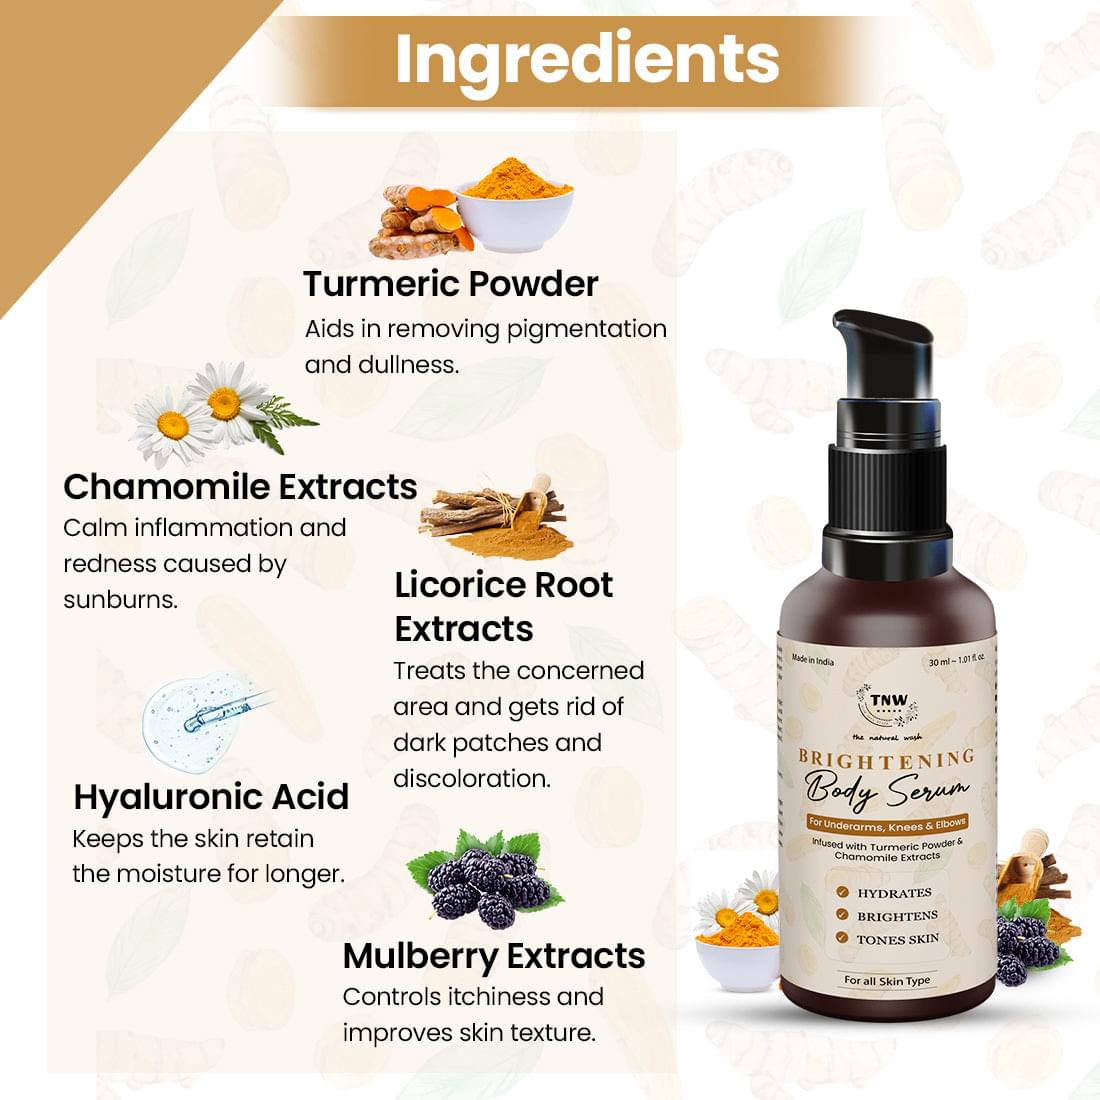 Body Brightening Serum With Turmeric Powder and Chamomile Extracts